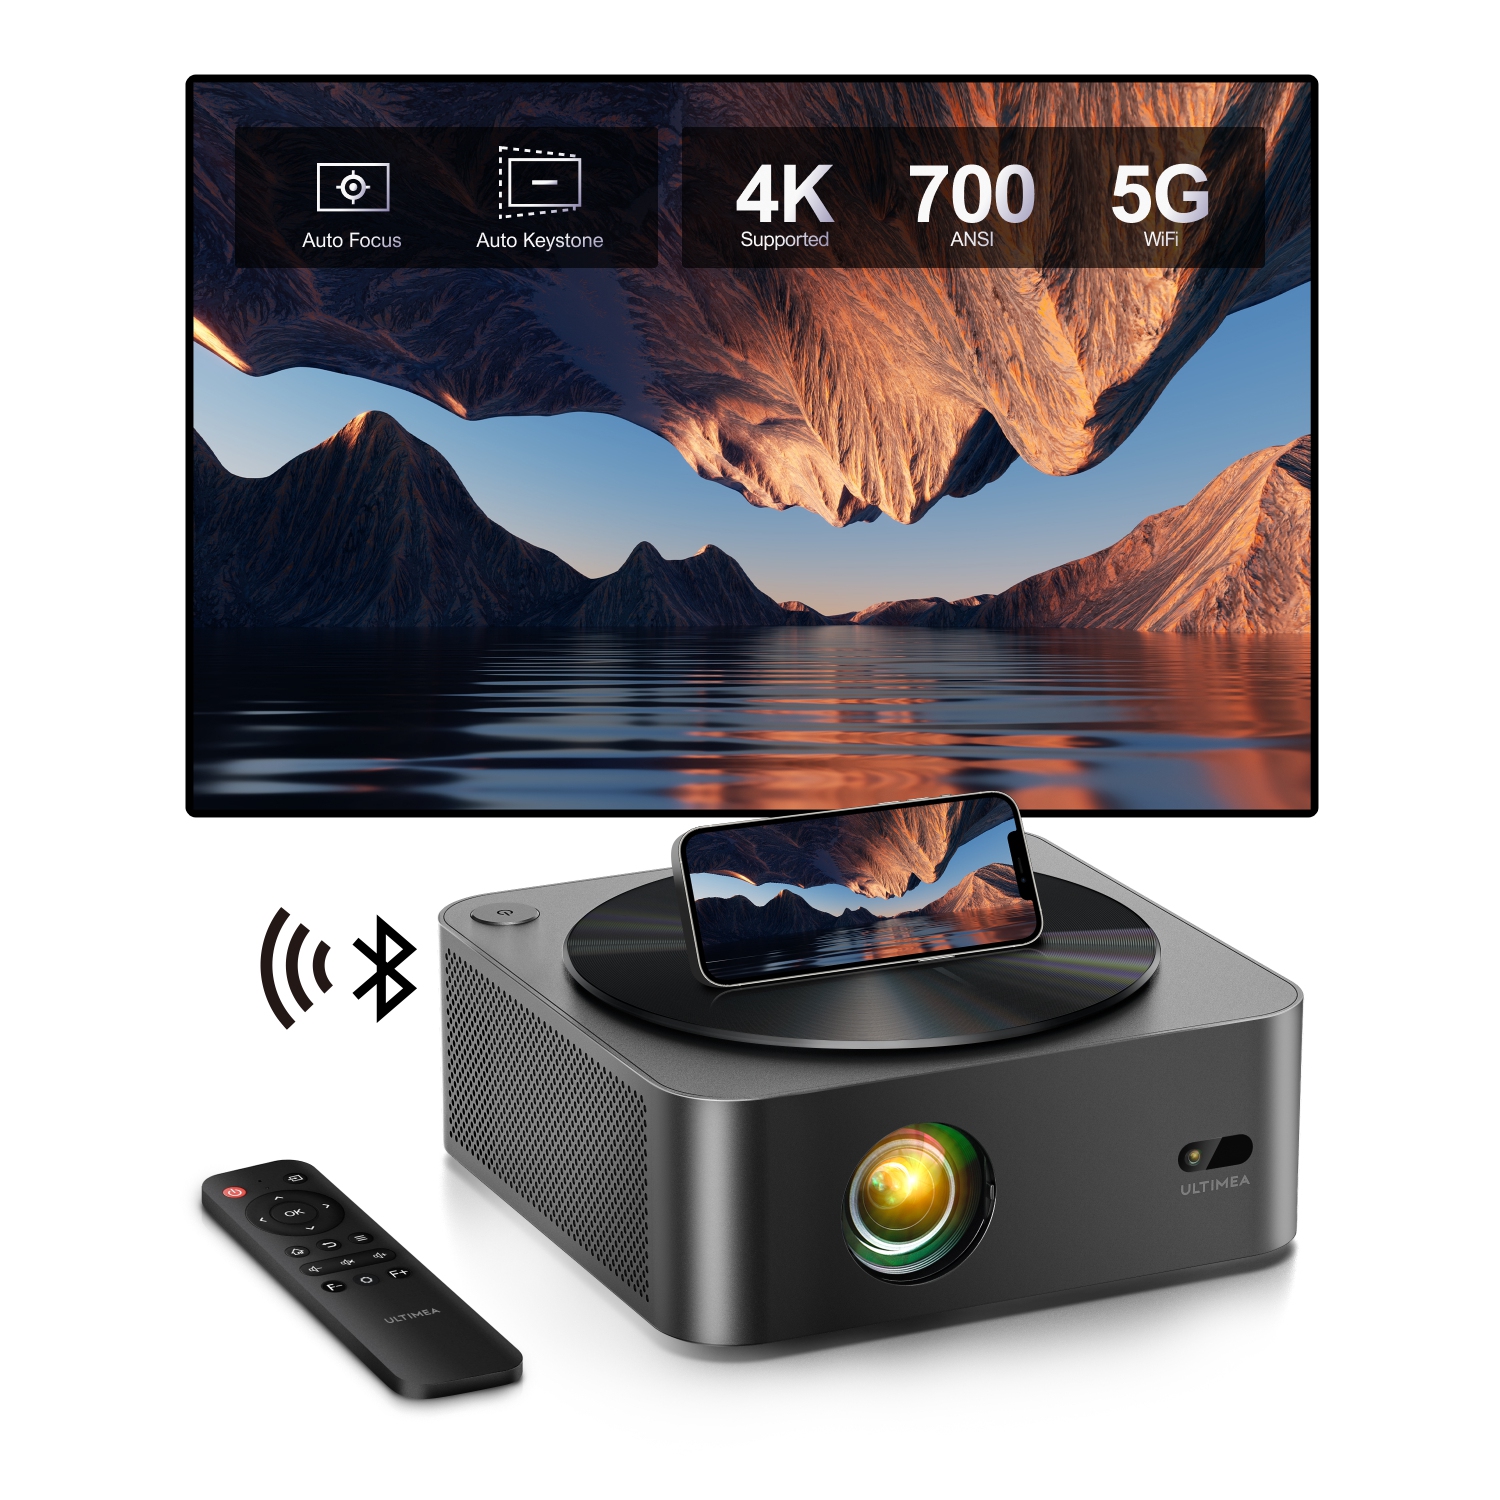 Ultimea Projector Full HD 1080P Native with Autofocus & 6D Auto Keystone , Projector 4K Home Theater supports 700 ANSI 21,000 Lux, 5G WiFi Bluetooth projector